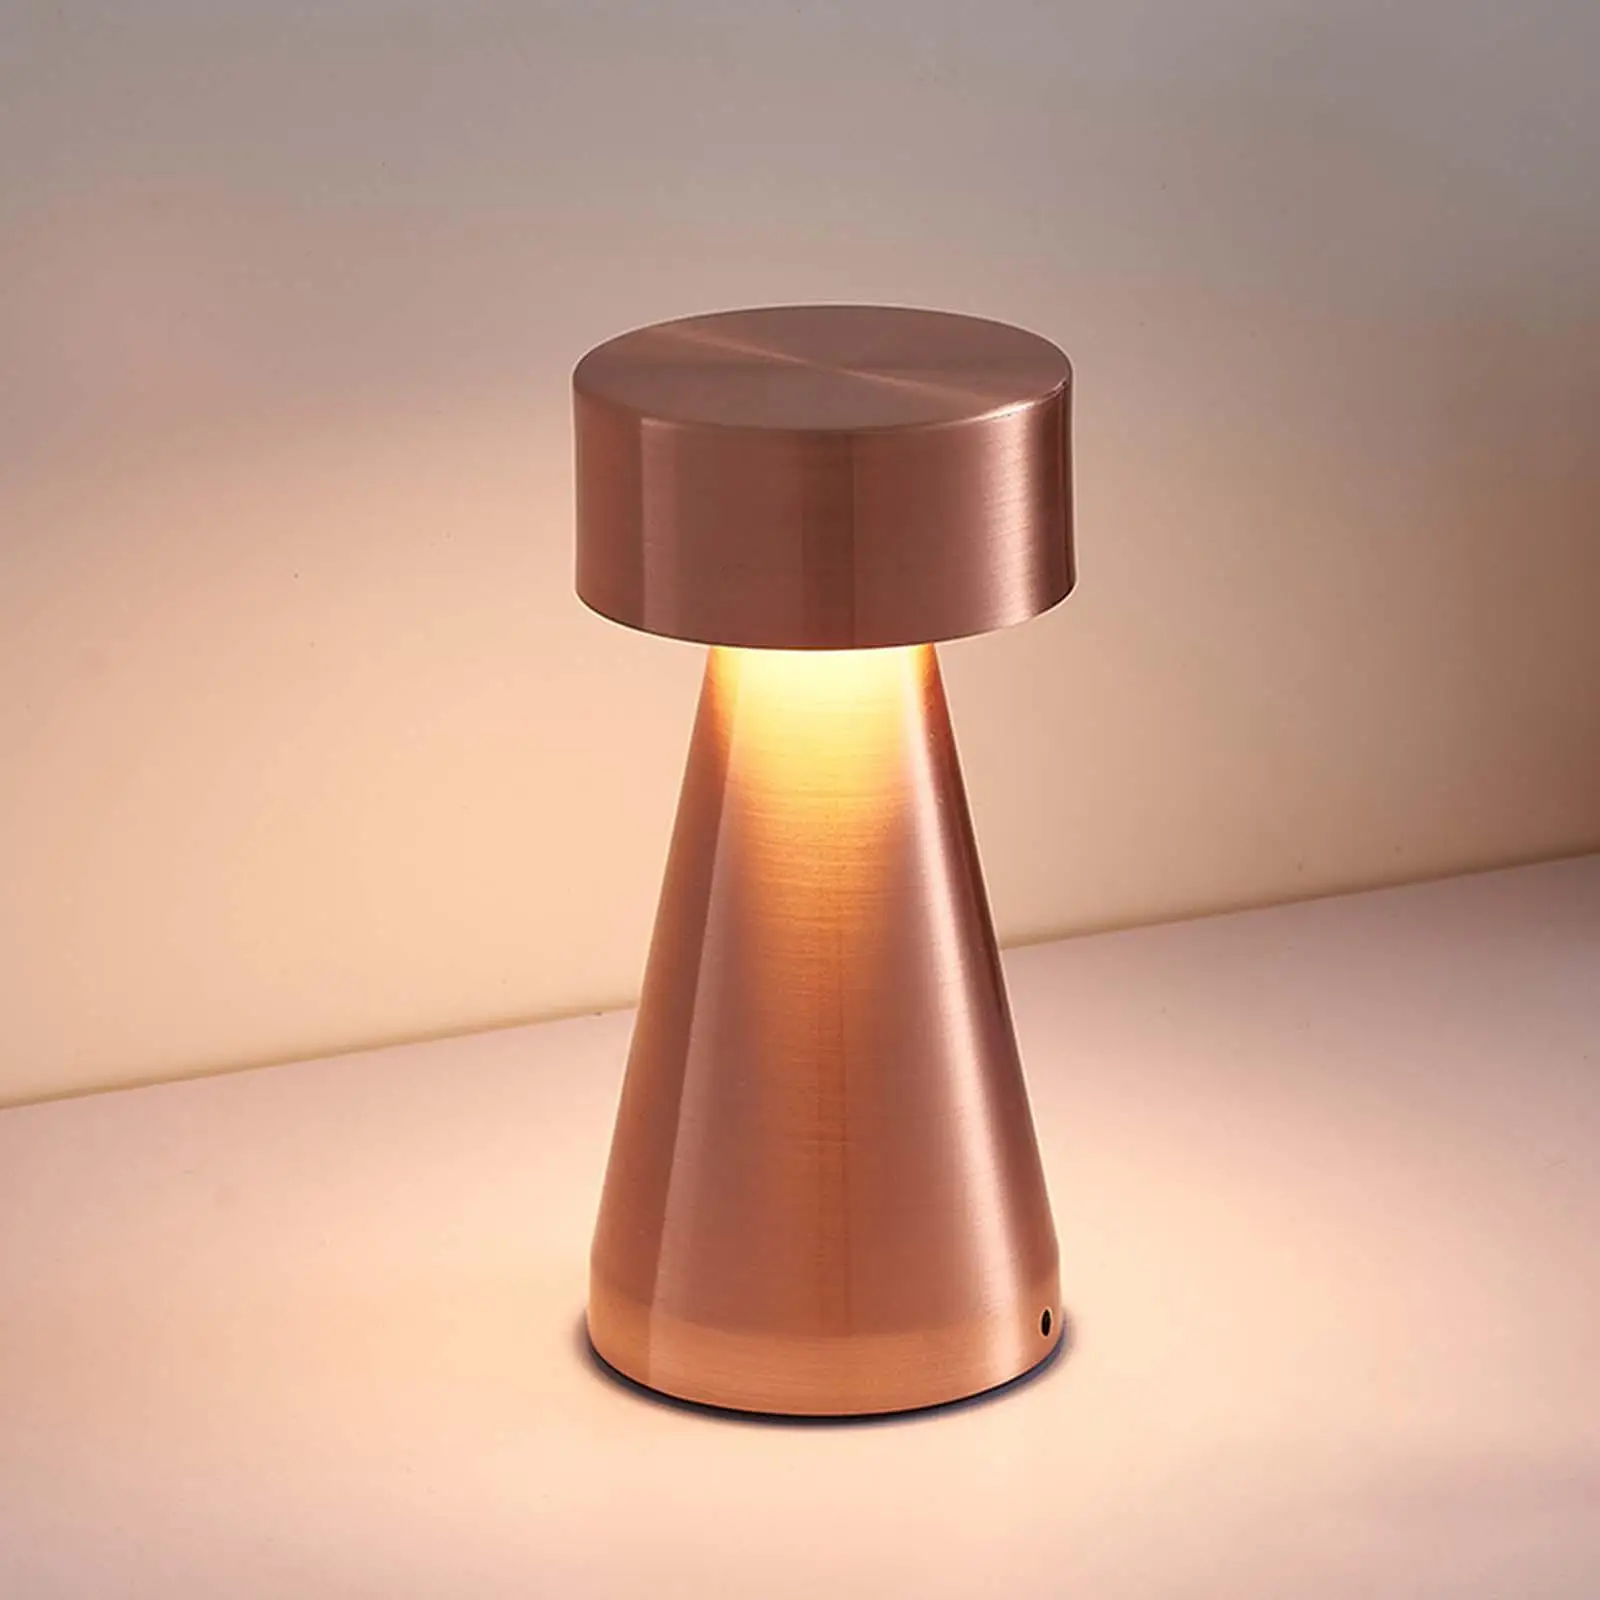 Retro Style Bar Table Lamp Dimmable USB Charging 3 Level Night Light Portable LED Desk Lamp for Bedroom Office Hotel Decoration